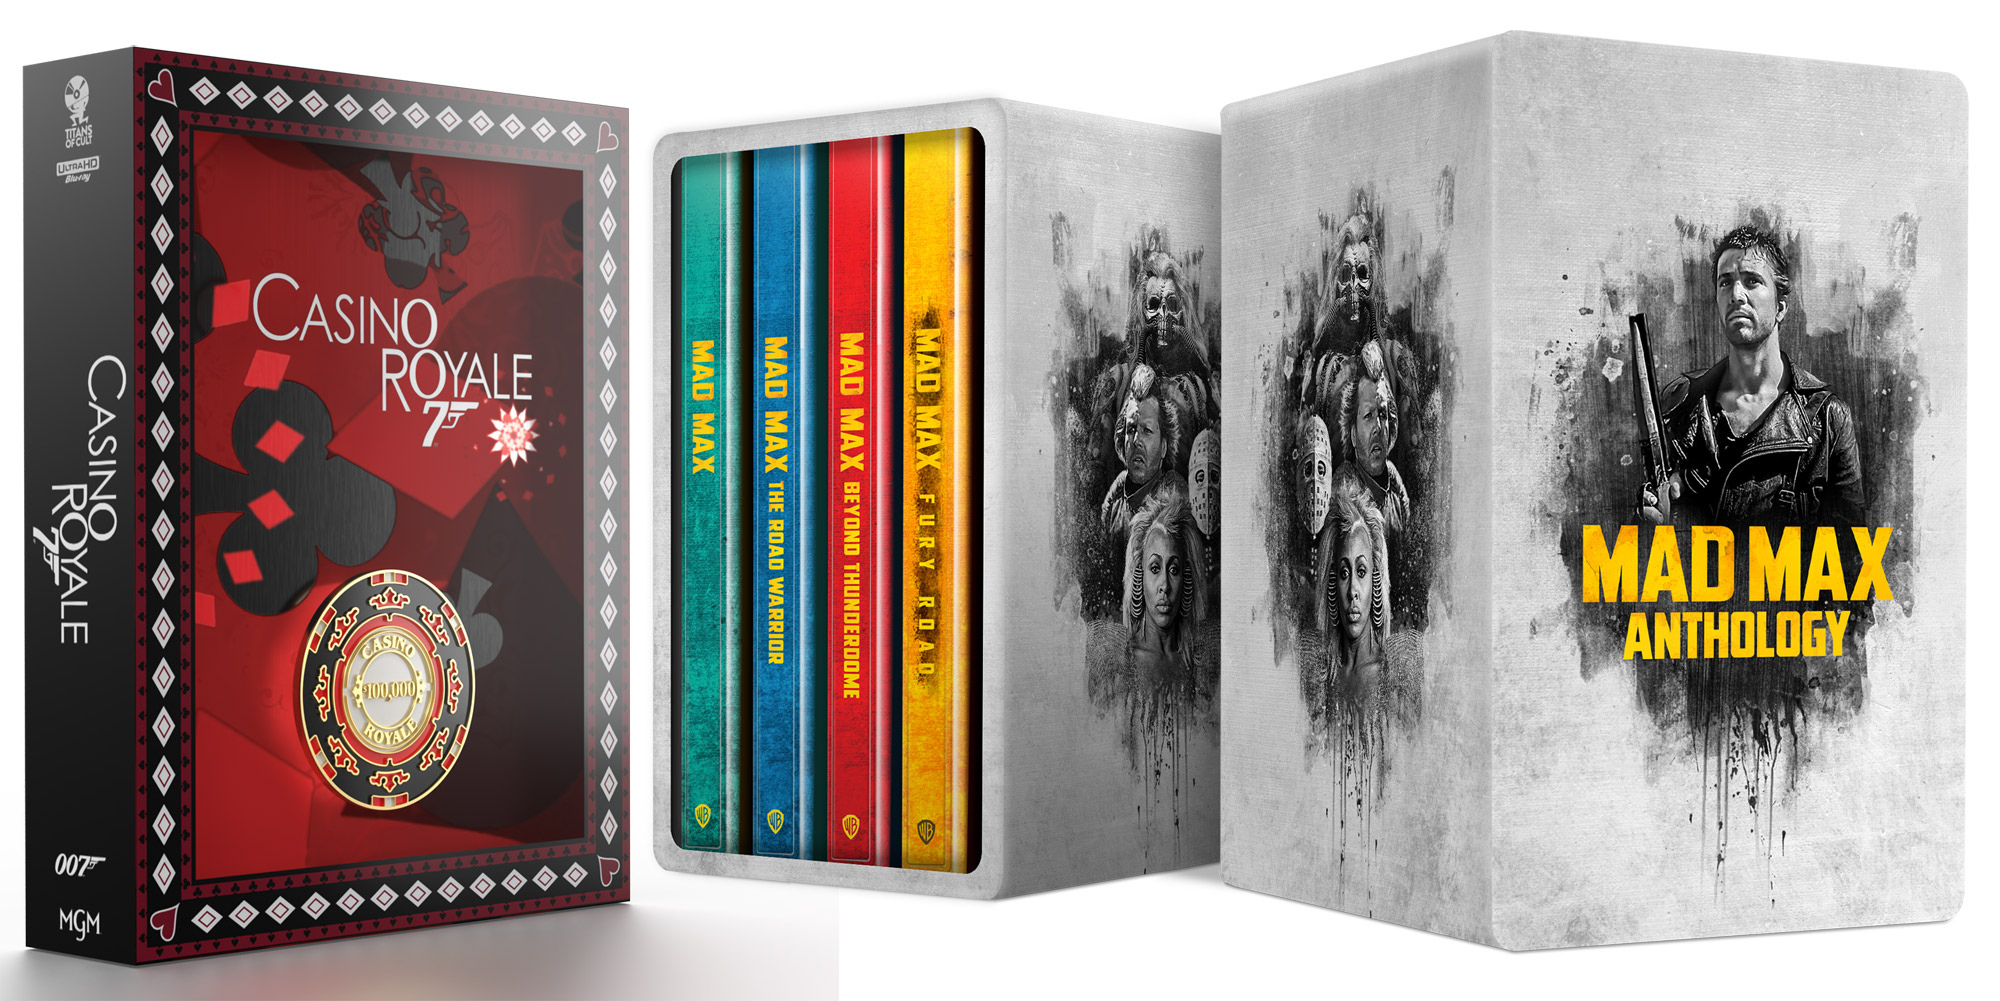 Mad Max Anthology Steelbook e Casino Royale - Titans of Cult